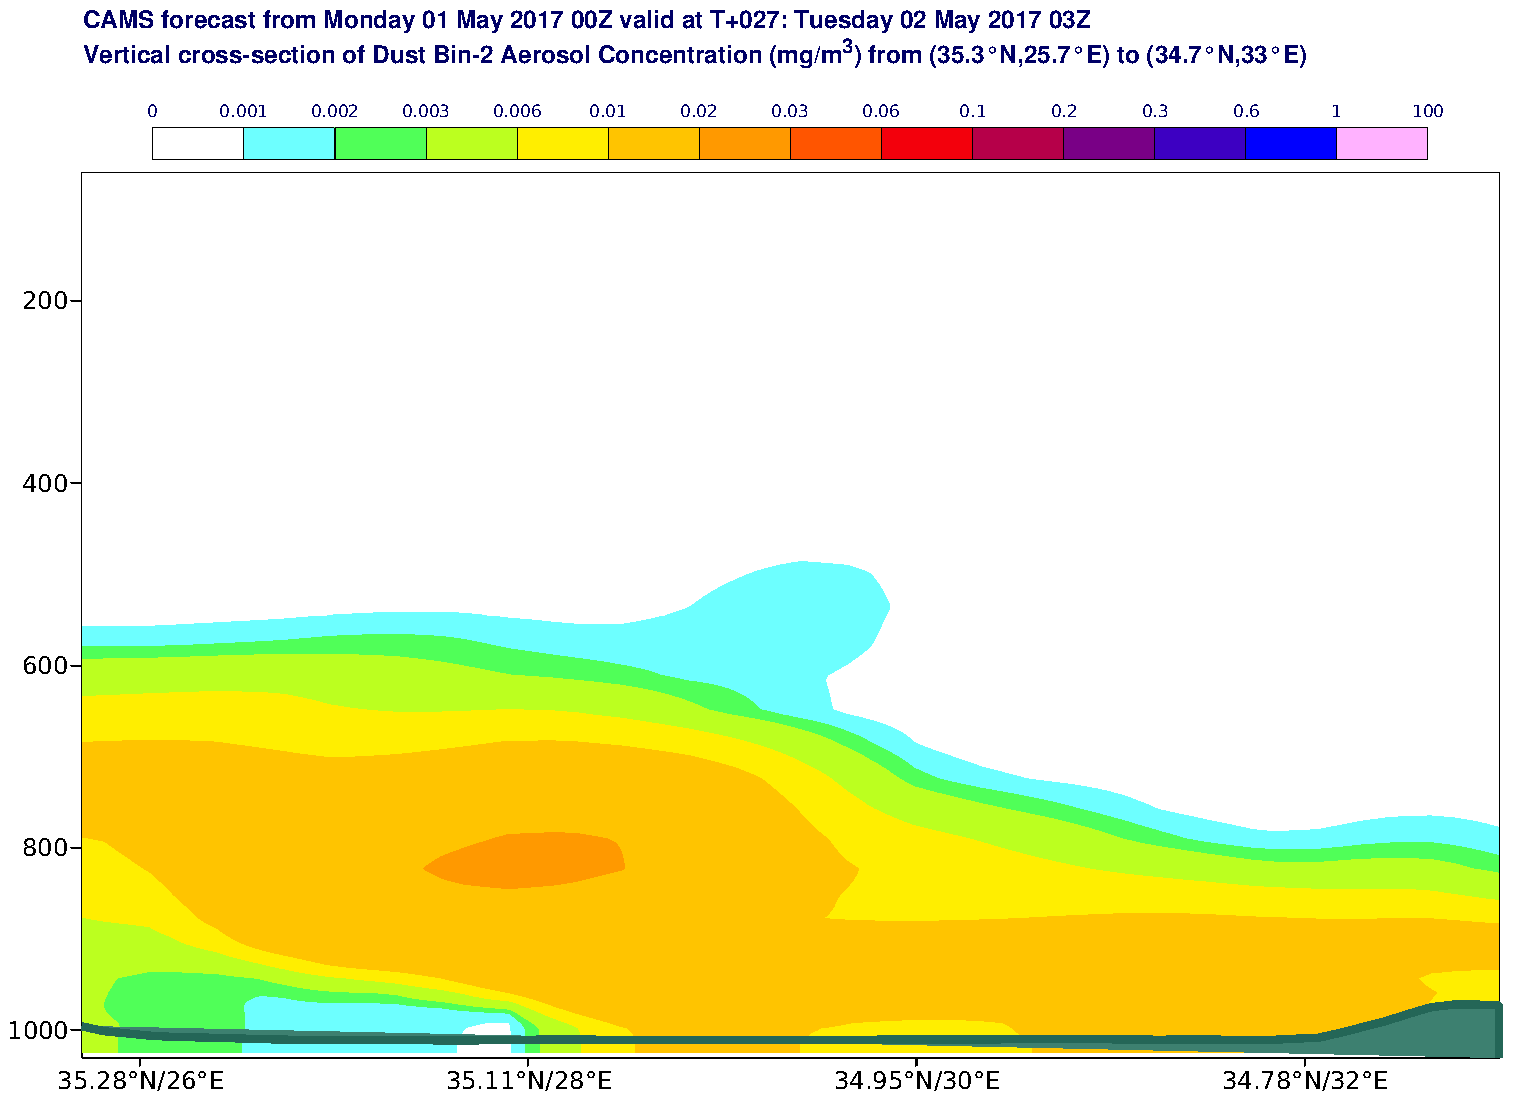 Vertical cross-section of Dust Bin-2 Aerosol Concentration (mg/m3) valid at T27 - 2017-05-02 03:00